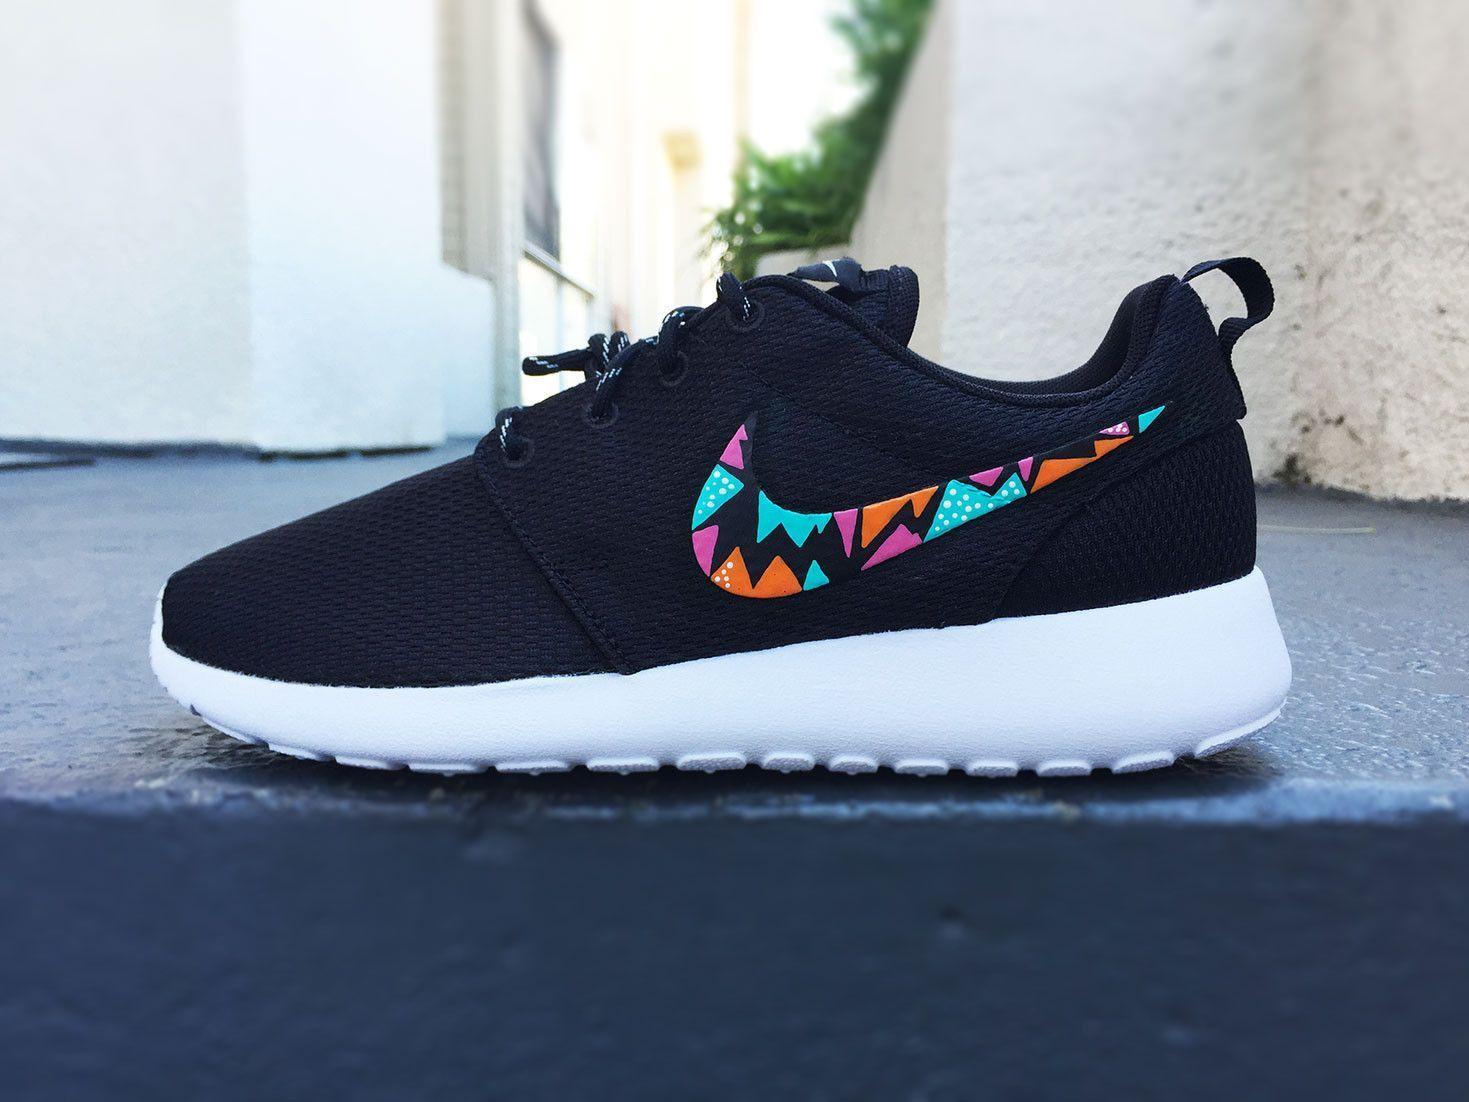 Nike Shoes with the Triangle Logo - Womens shoes: Womens Custom Nike Roshe Run sneakers, triangle tr